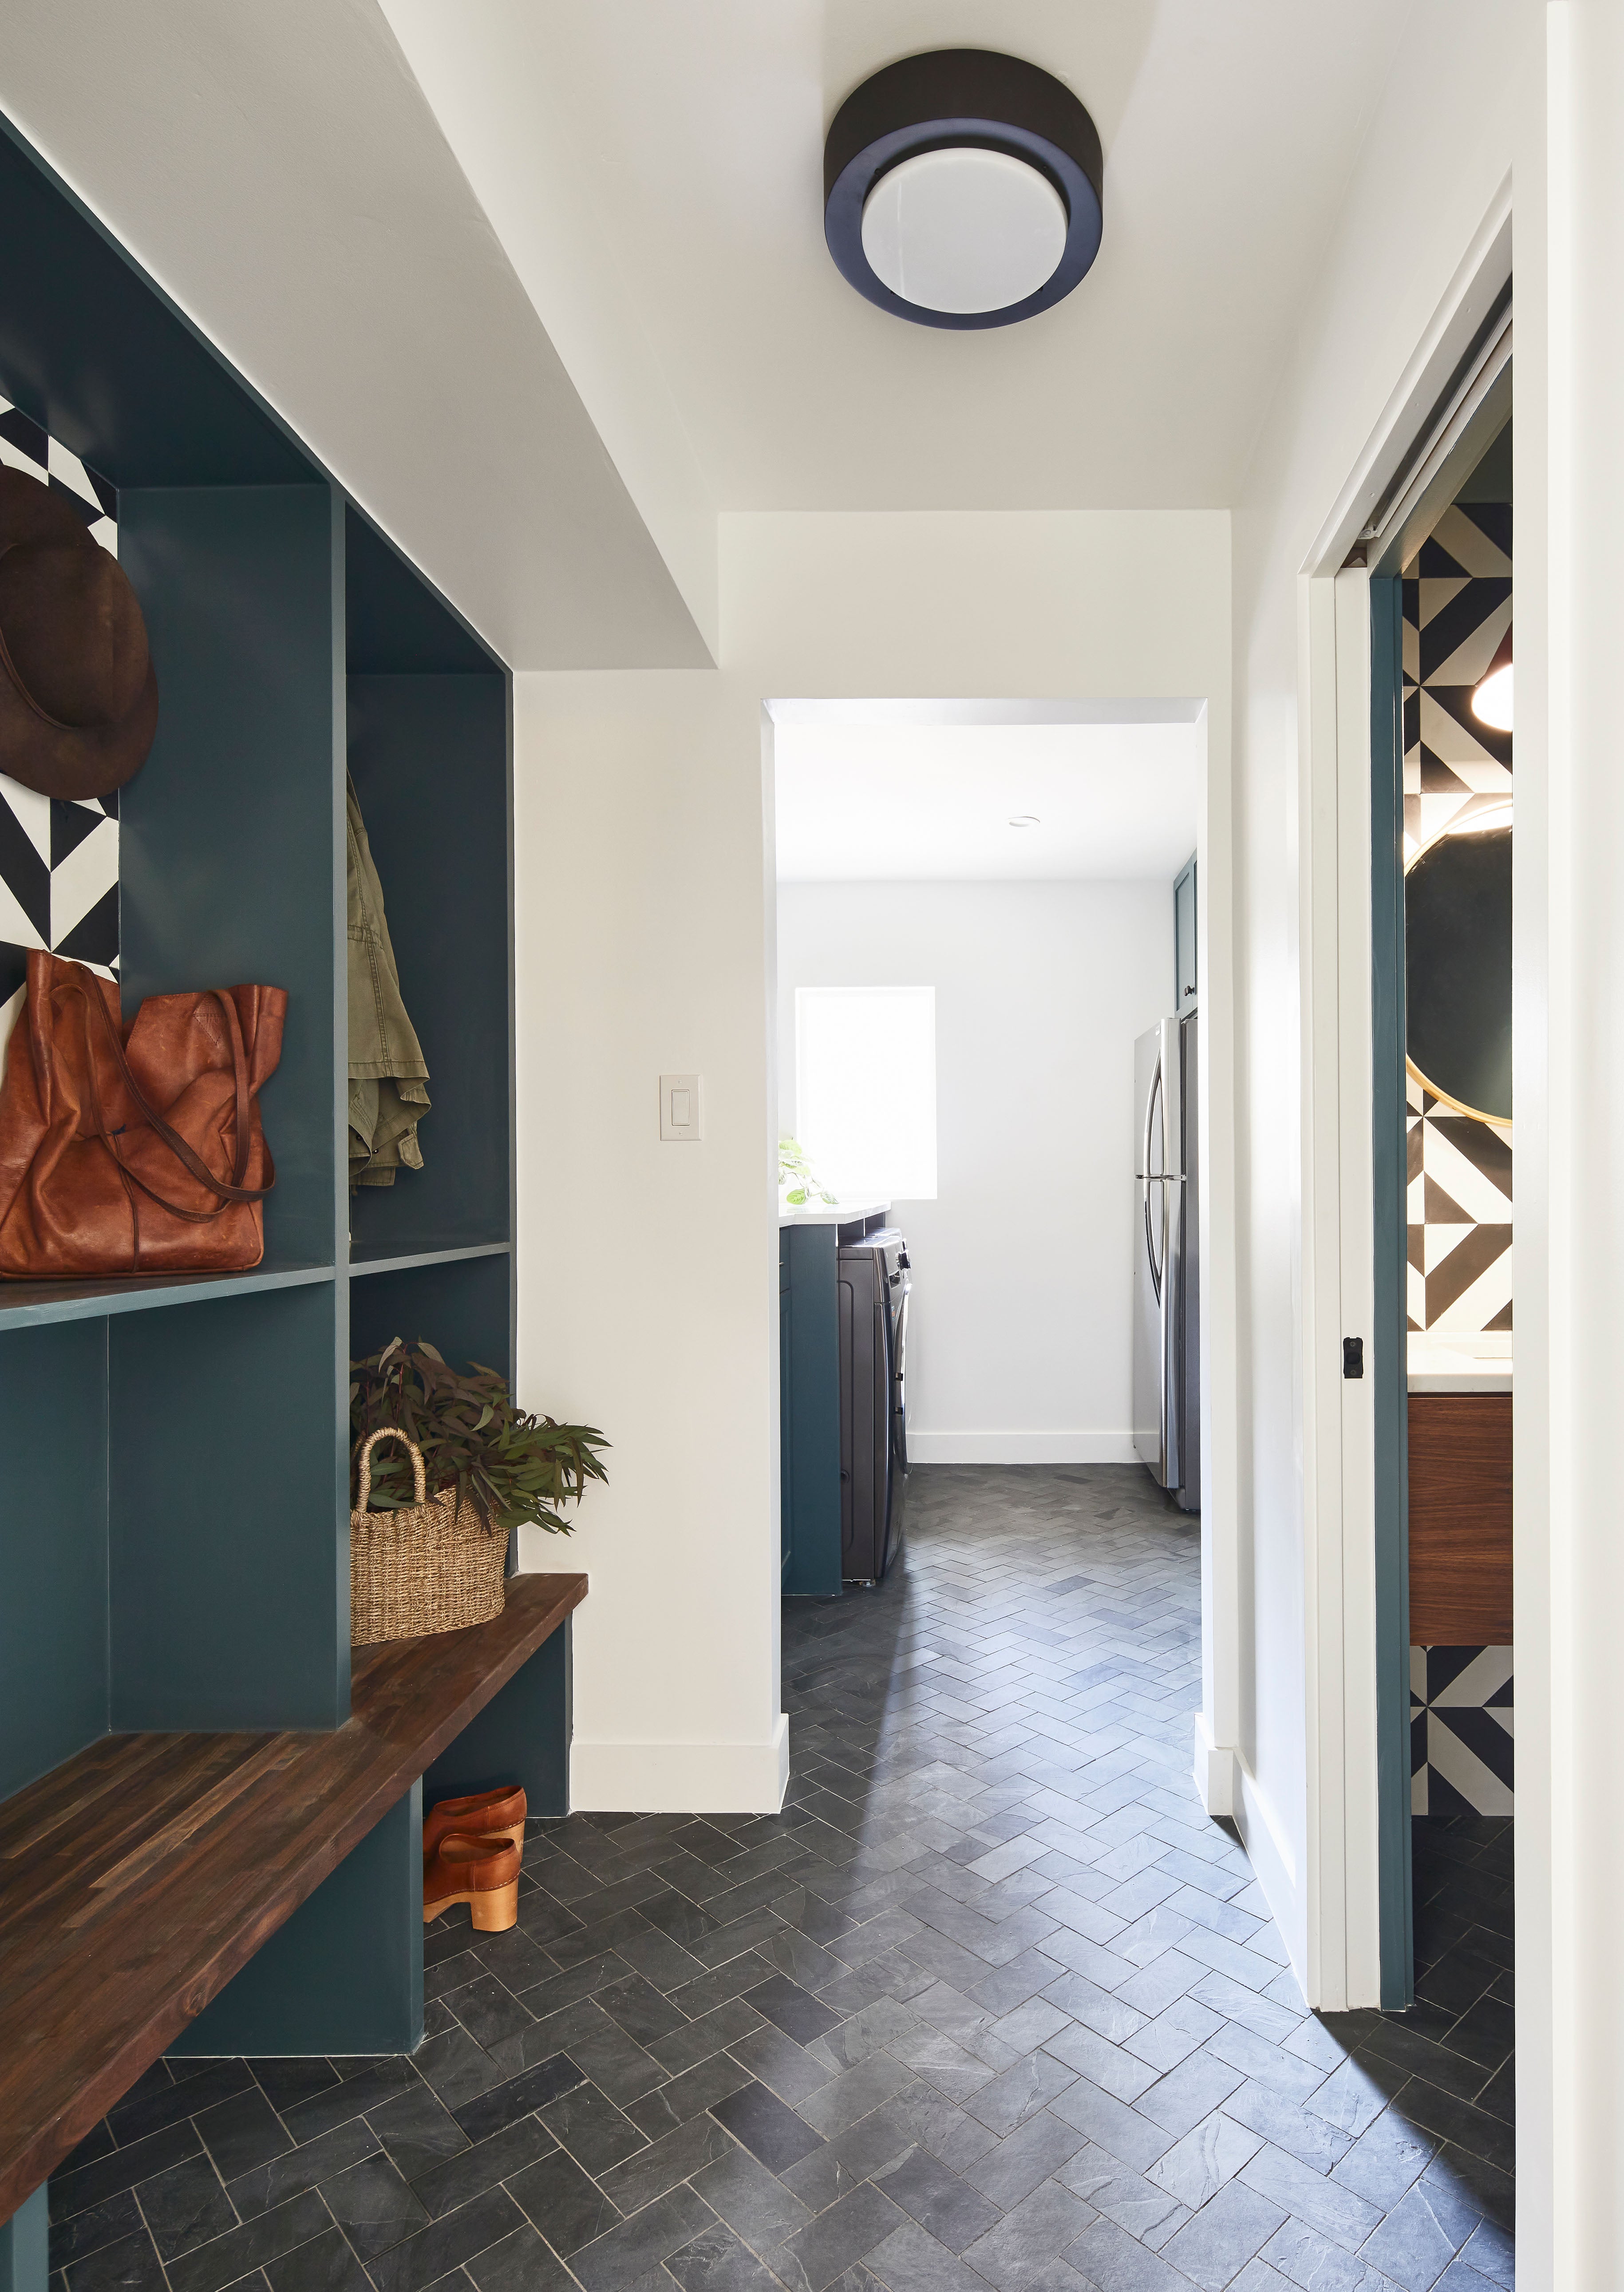 What Kind of Floor Is Best for Mudroom?